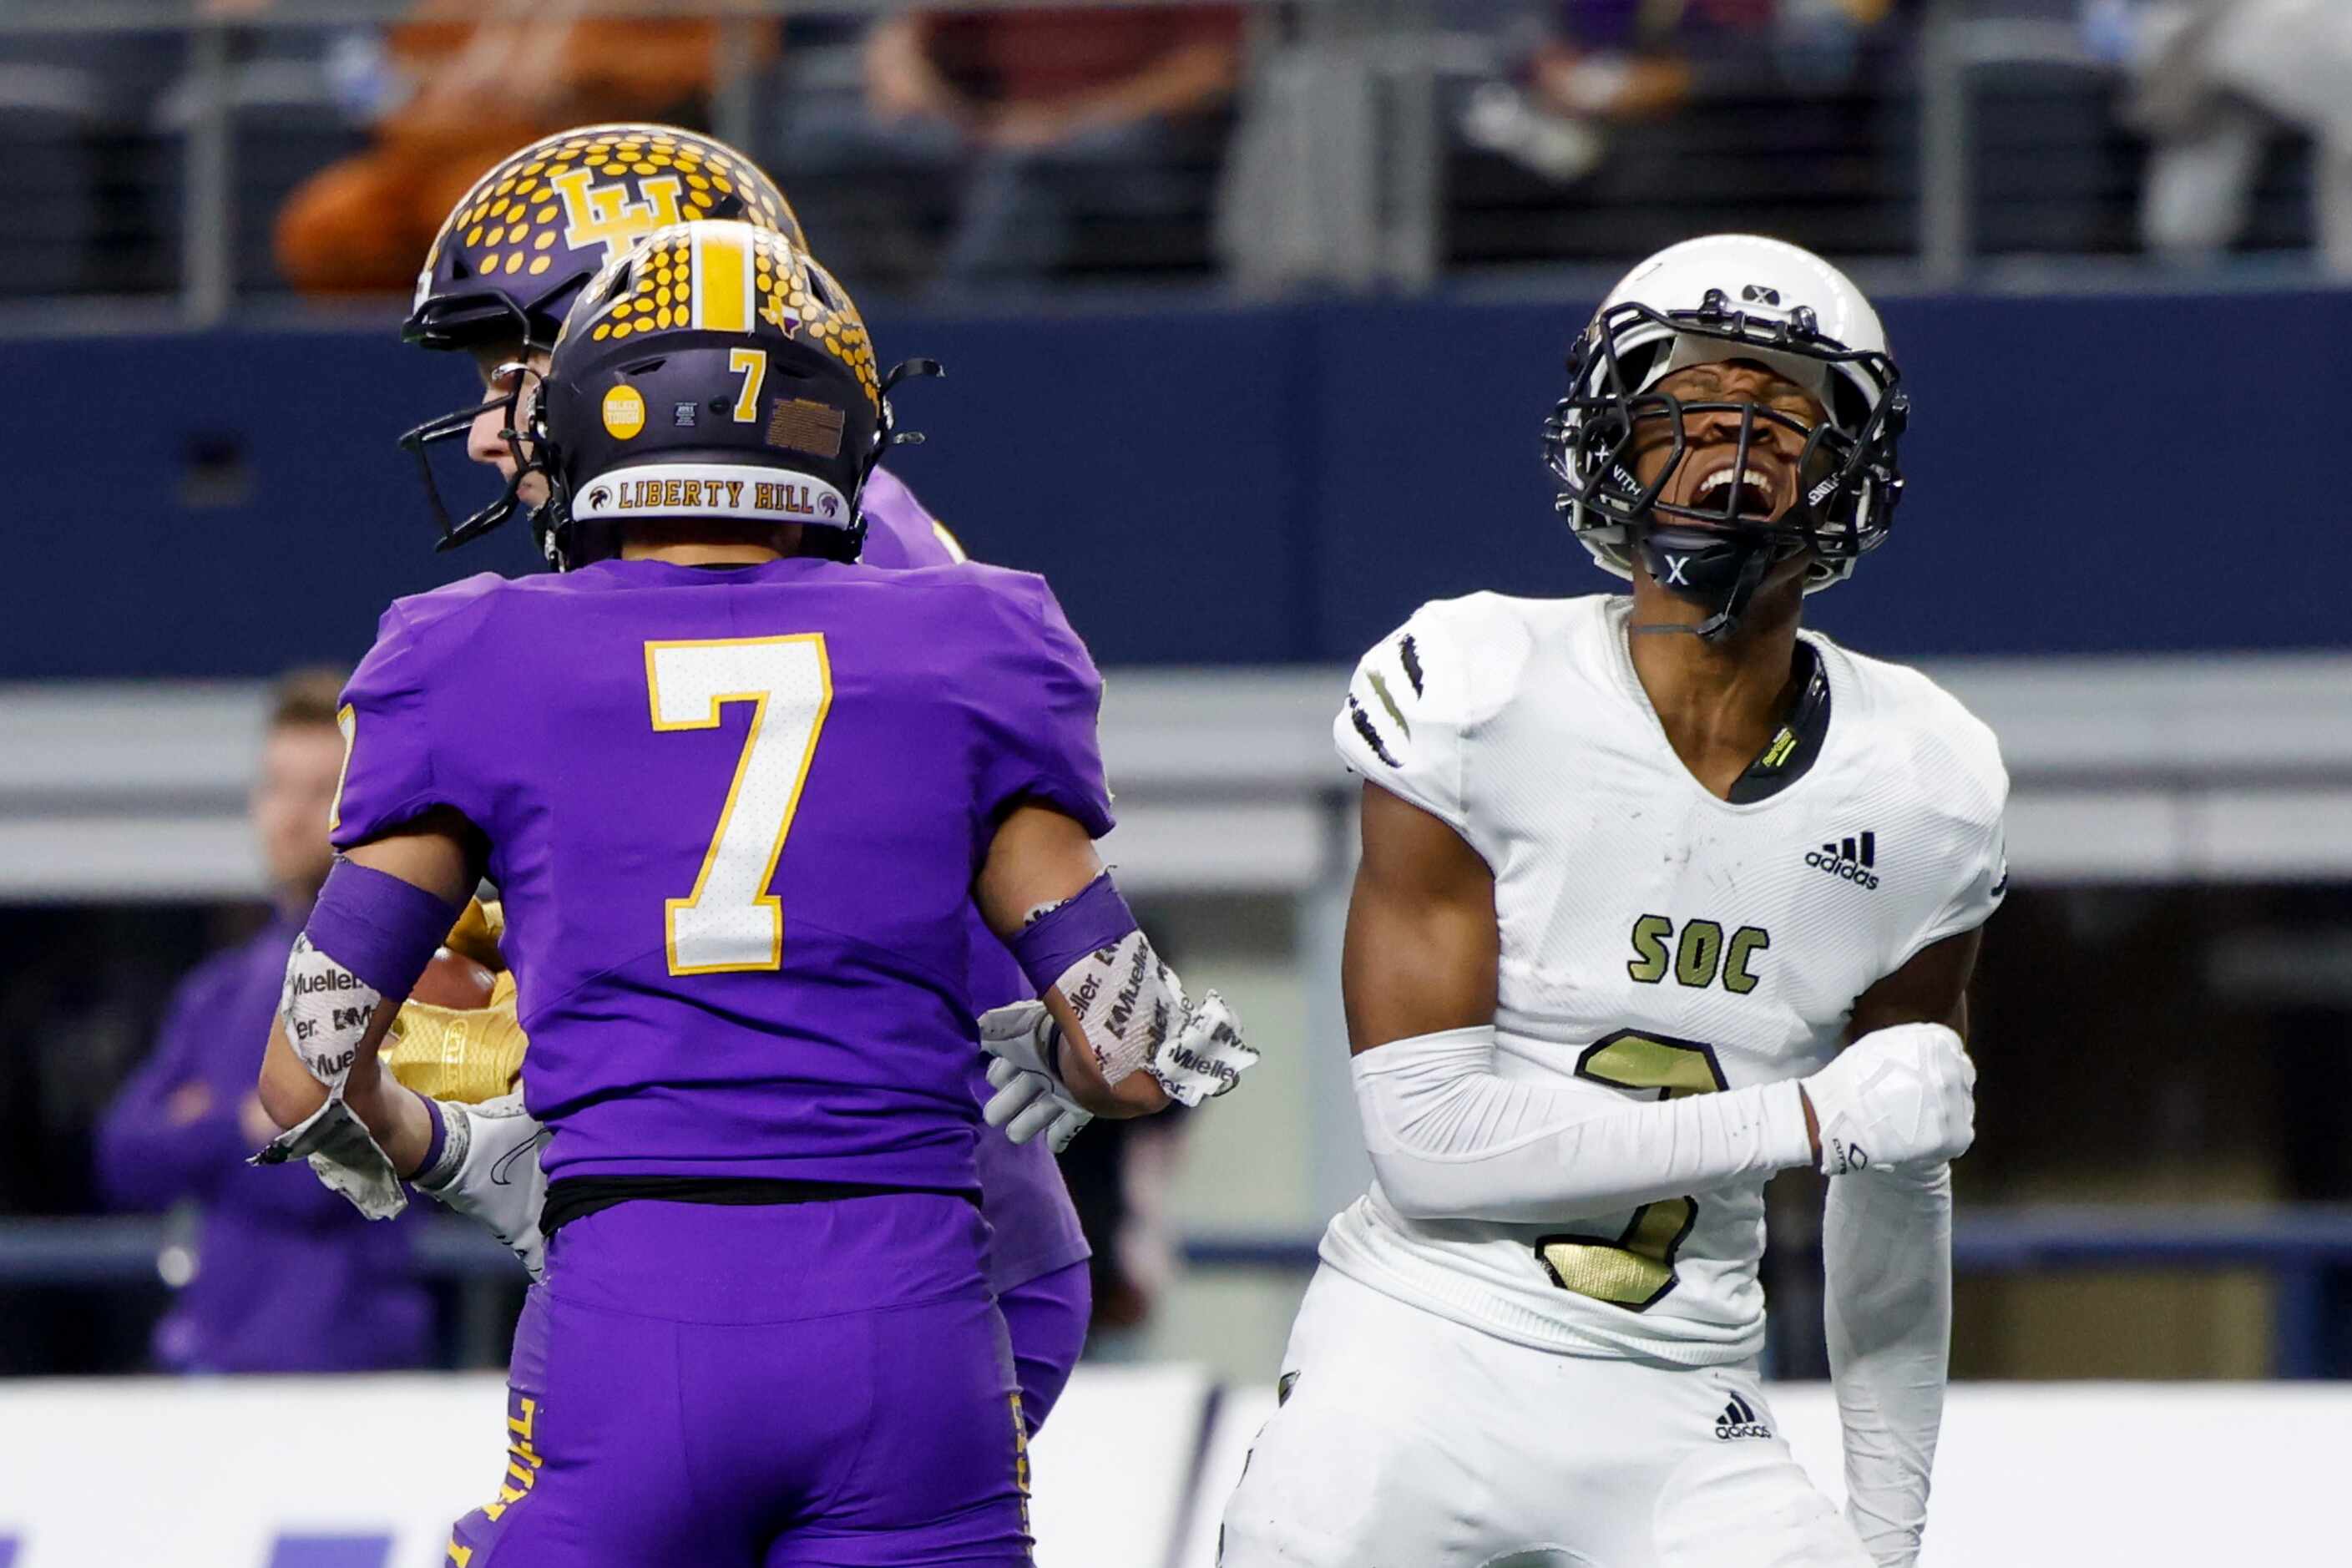 South Oak Cliff wide receiver Kylin Mathis (3) celebrates a catch in front of Liberty Hill...